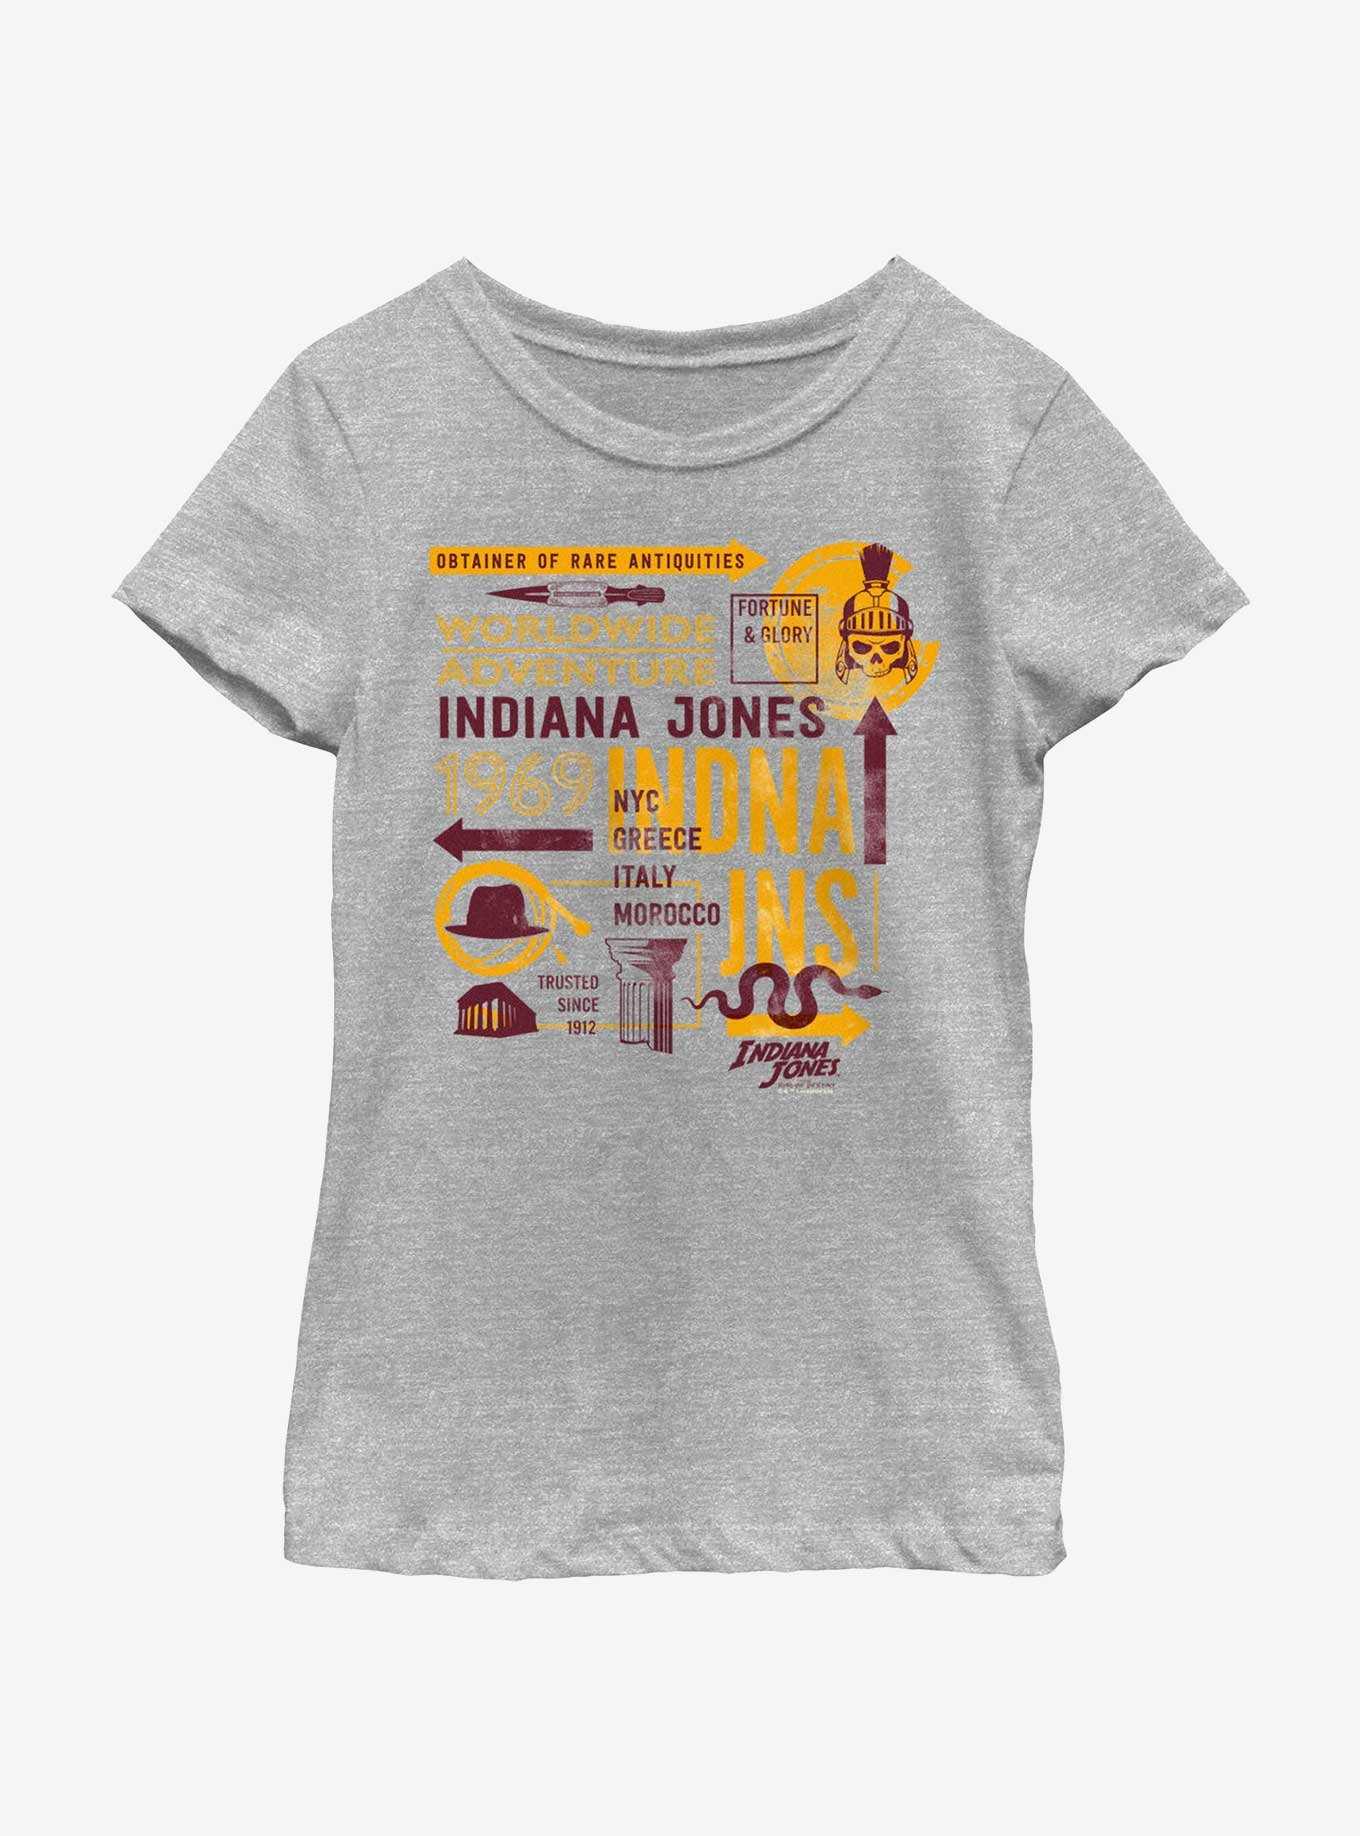 Indiana Jones and the Dial of Destiny Passport Infographic Girls Youth T-Shirt, , hi-res